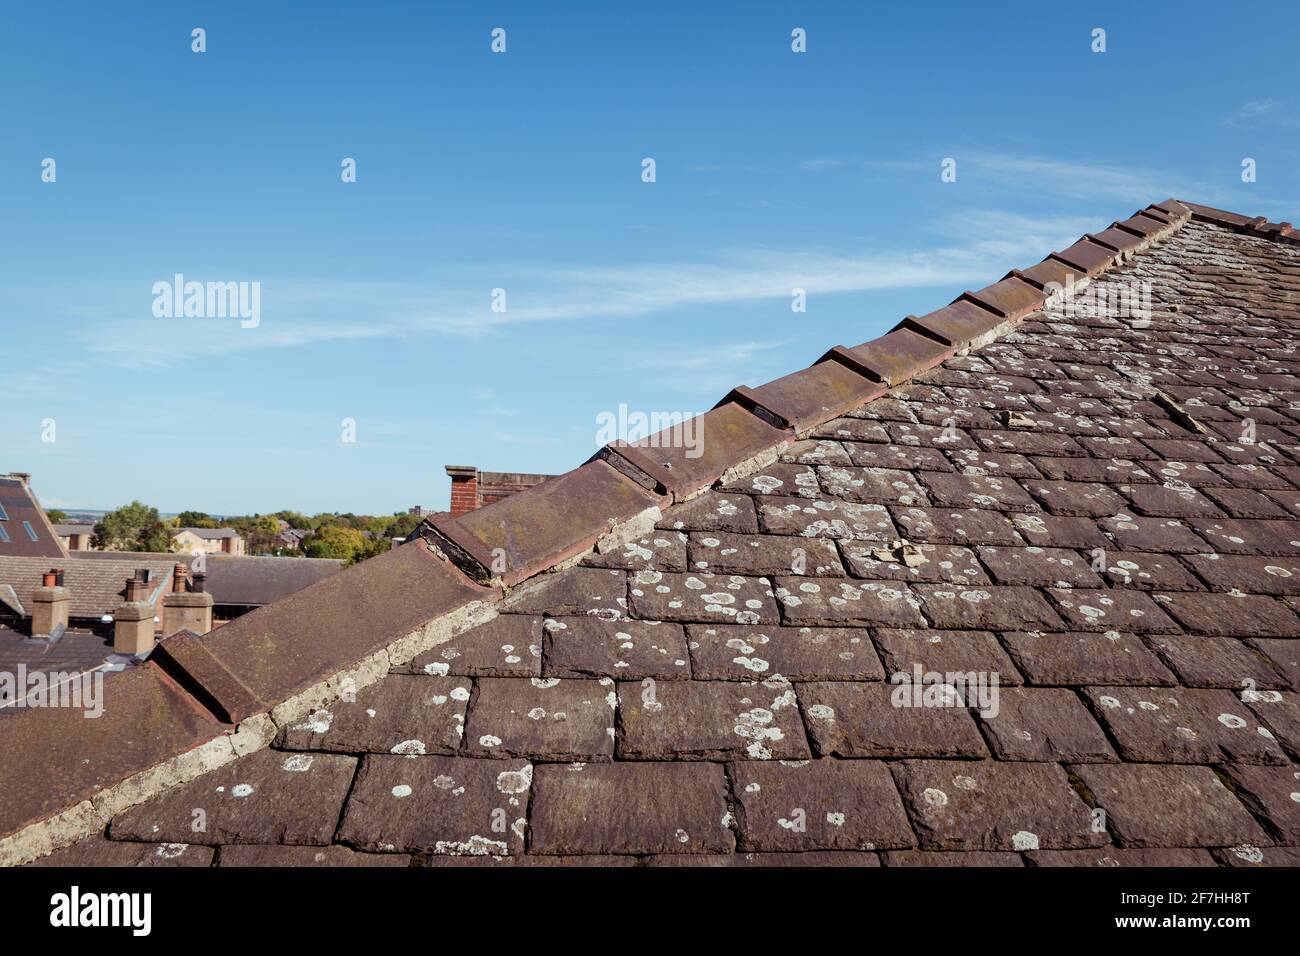 A triangle or hip roof end showing the ridge with capped angle tiles, mortar and lichen on the old traditional stone slates Stock Photo